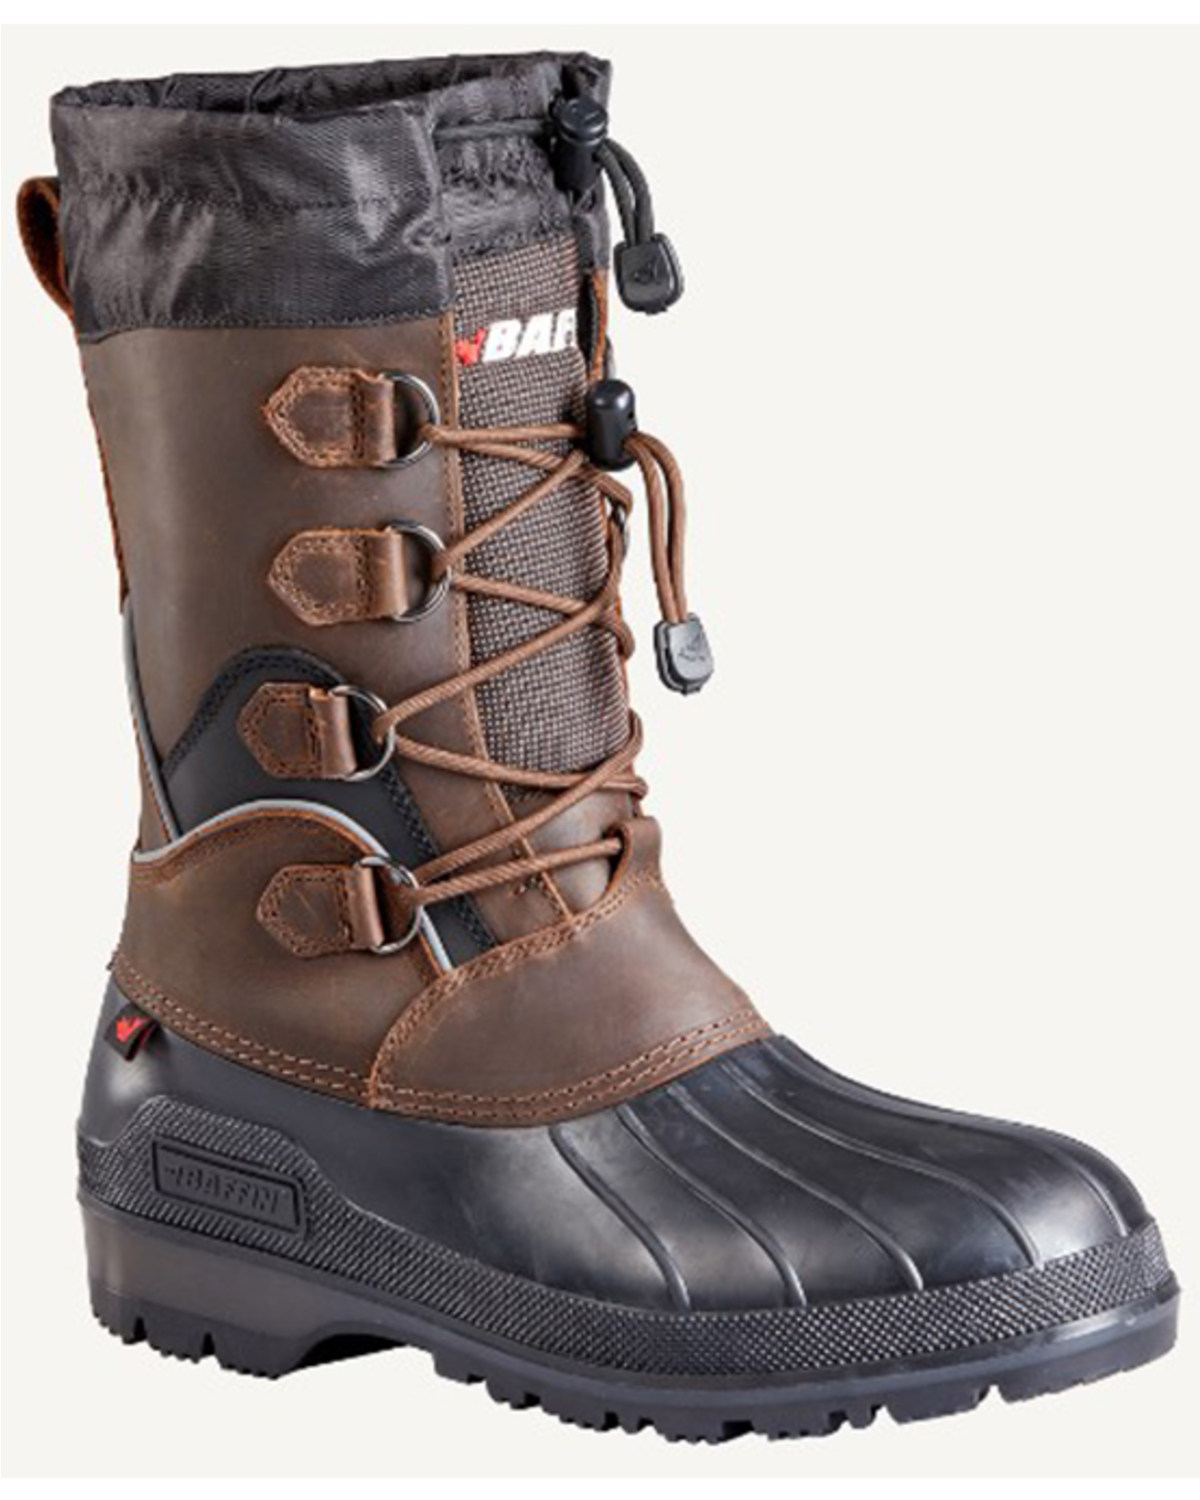 Baffin Men's Mountain Insulated Waterproof Boots - Round Toe